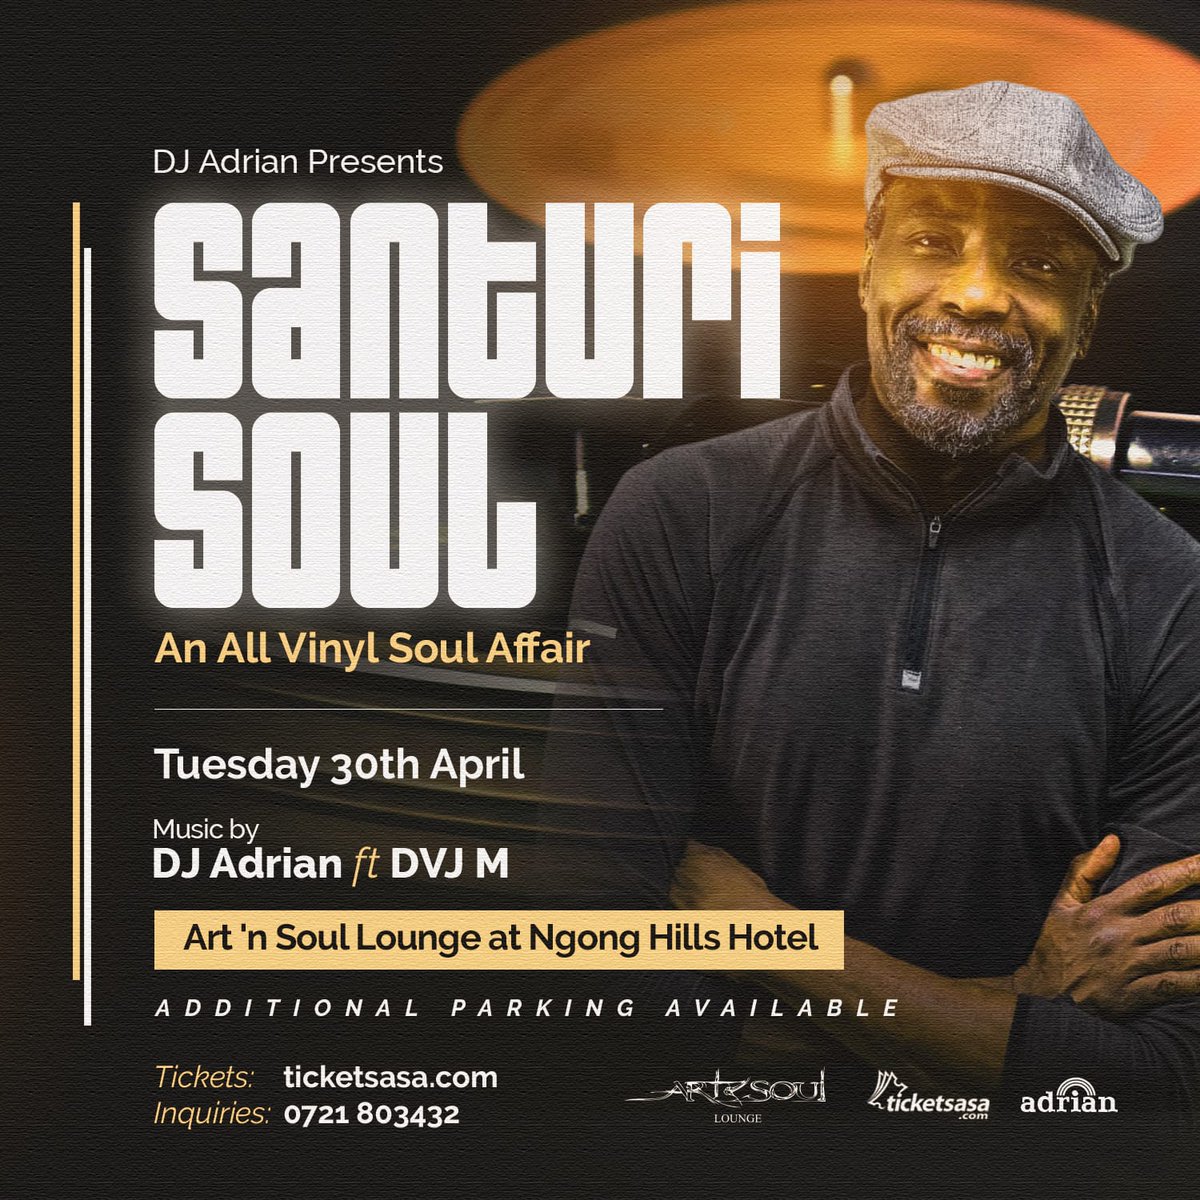 I love Playing My Records.Nothing Compares To That Rich Vinyl Sound. Introducing SANTURI SOUL. An All Vinyl Soul Affair. Will Be Serving You Your Favourite classic Hits Strictly On Vinyl On April 30th At Art n Soul Lounge. Get Tickets At ticketsasa.com/events/eventde…